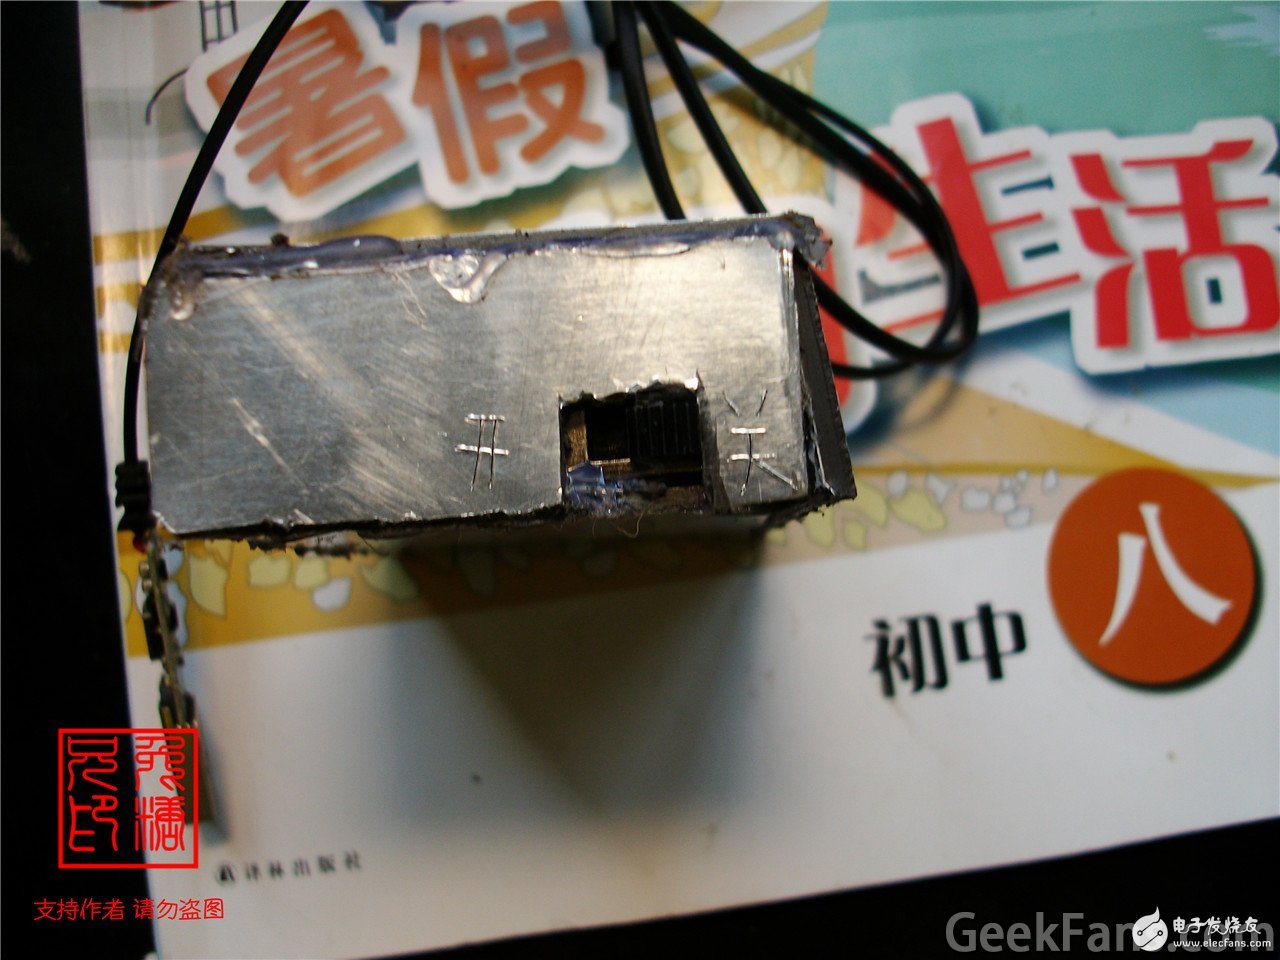 How to make a mobile power bank